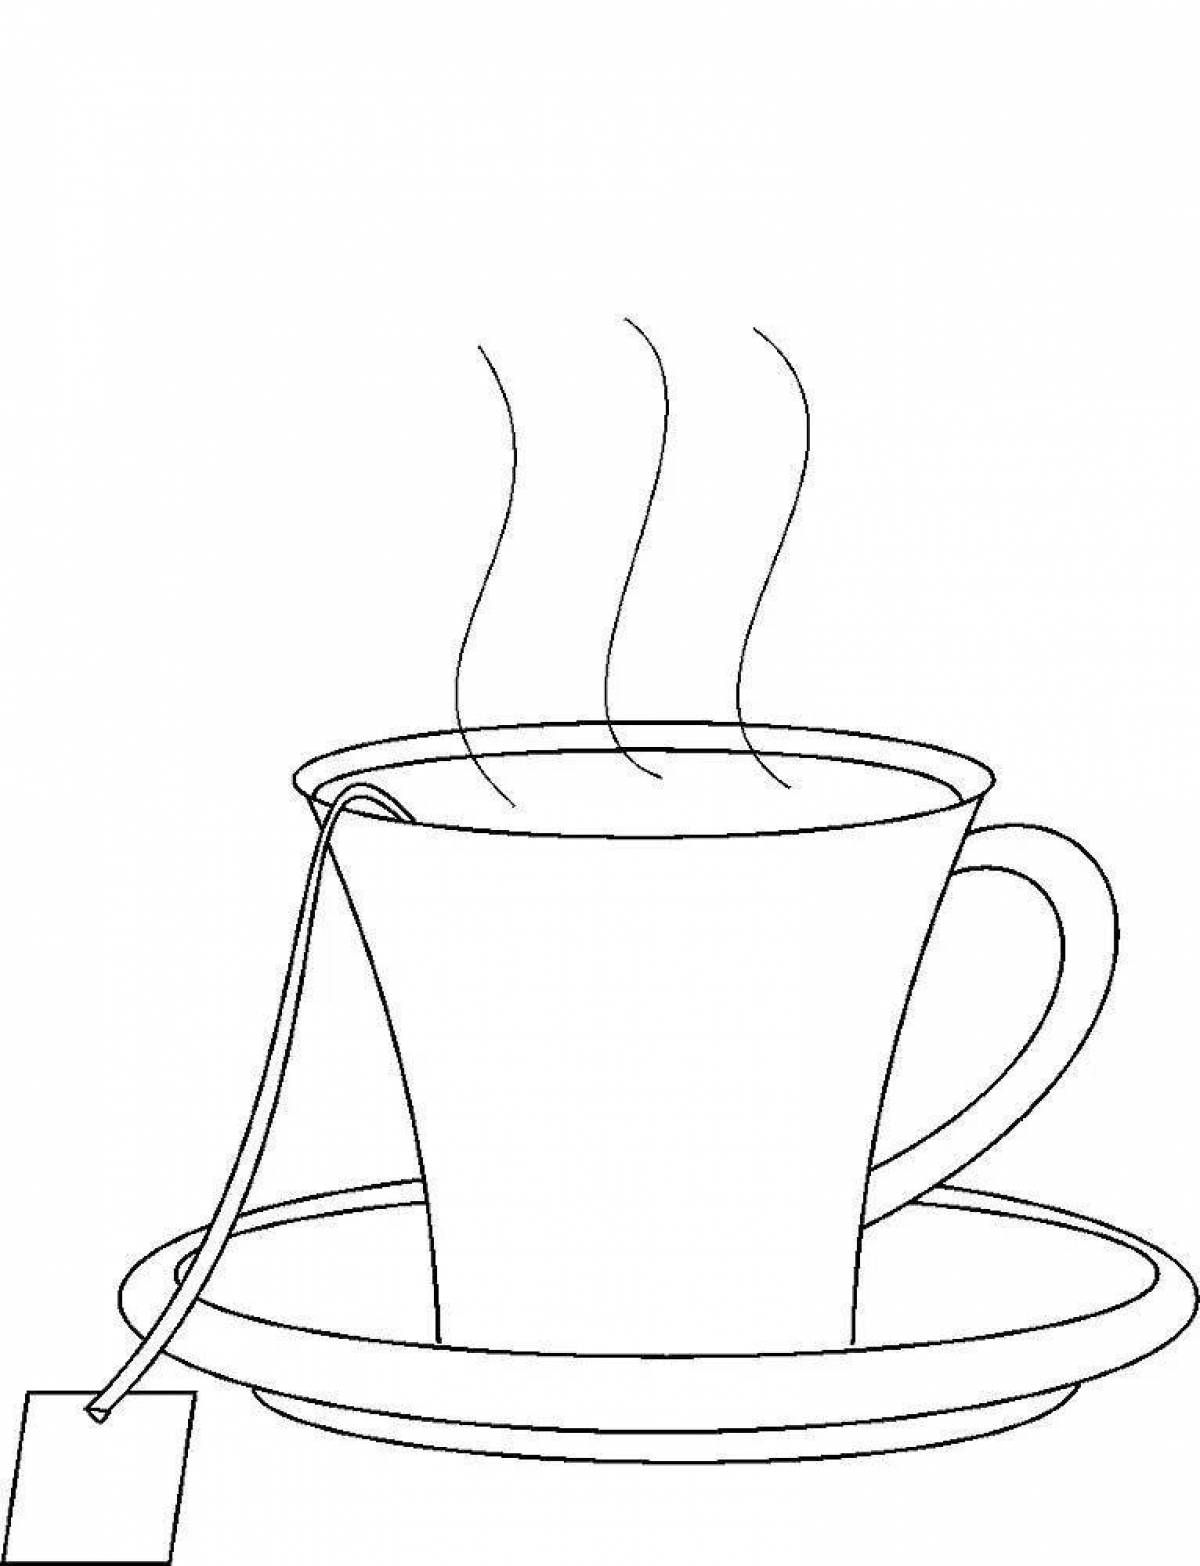 Gourmet tea cup coloring page